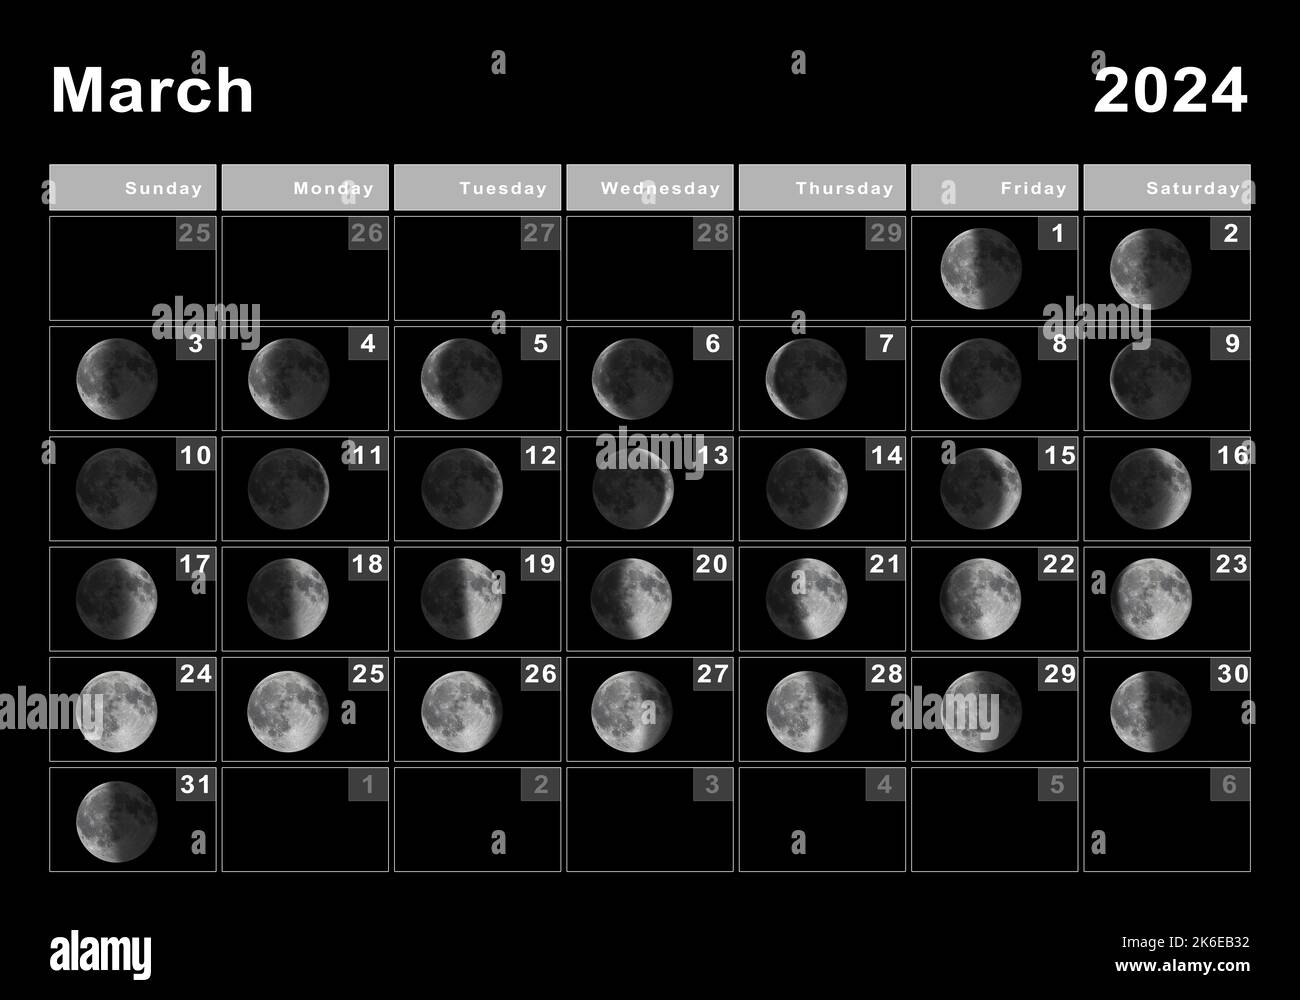 March 2024 Lunar calendar, Moon cycles, Moon Phases Stock Photo